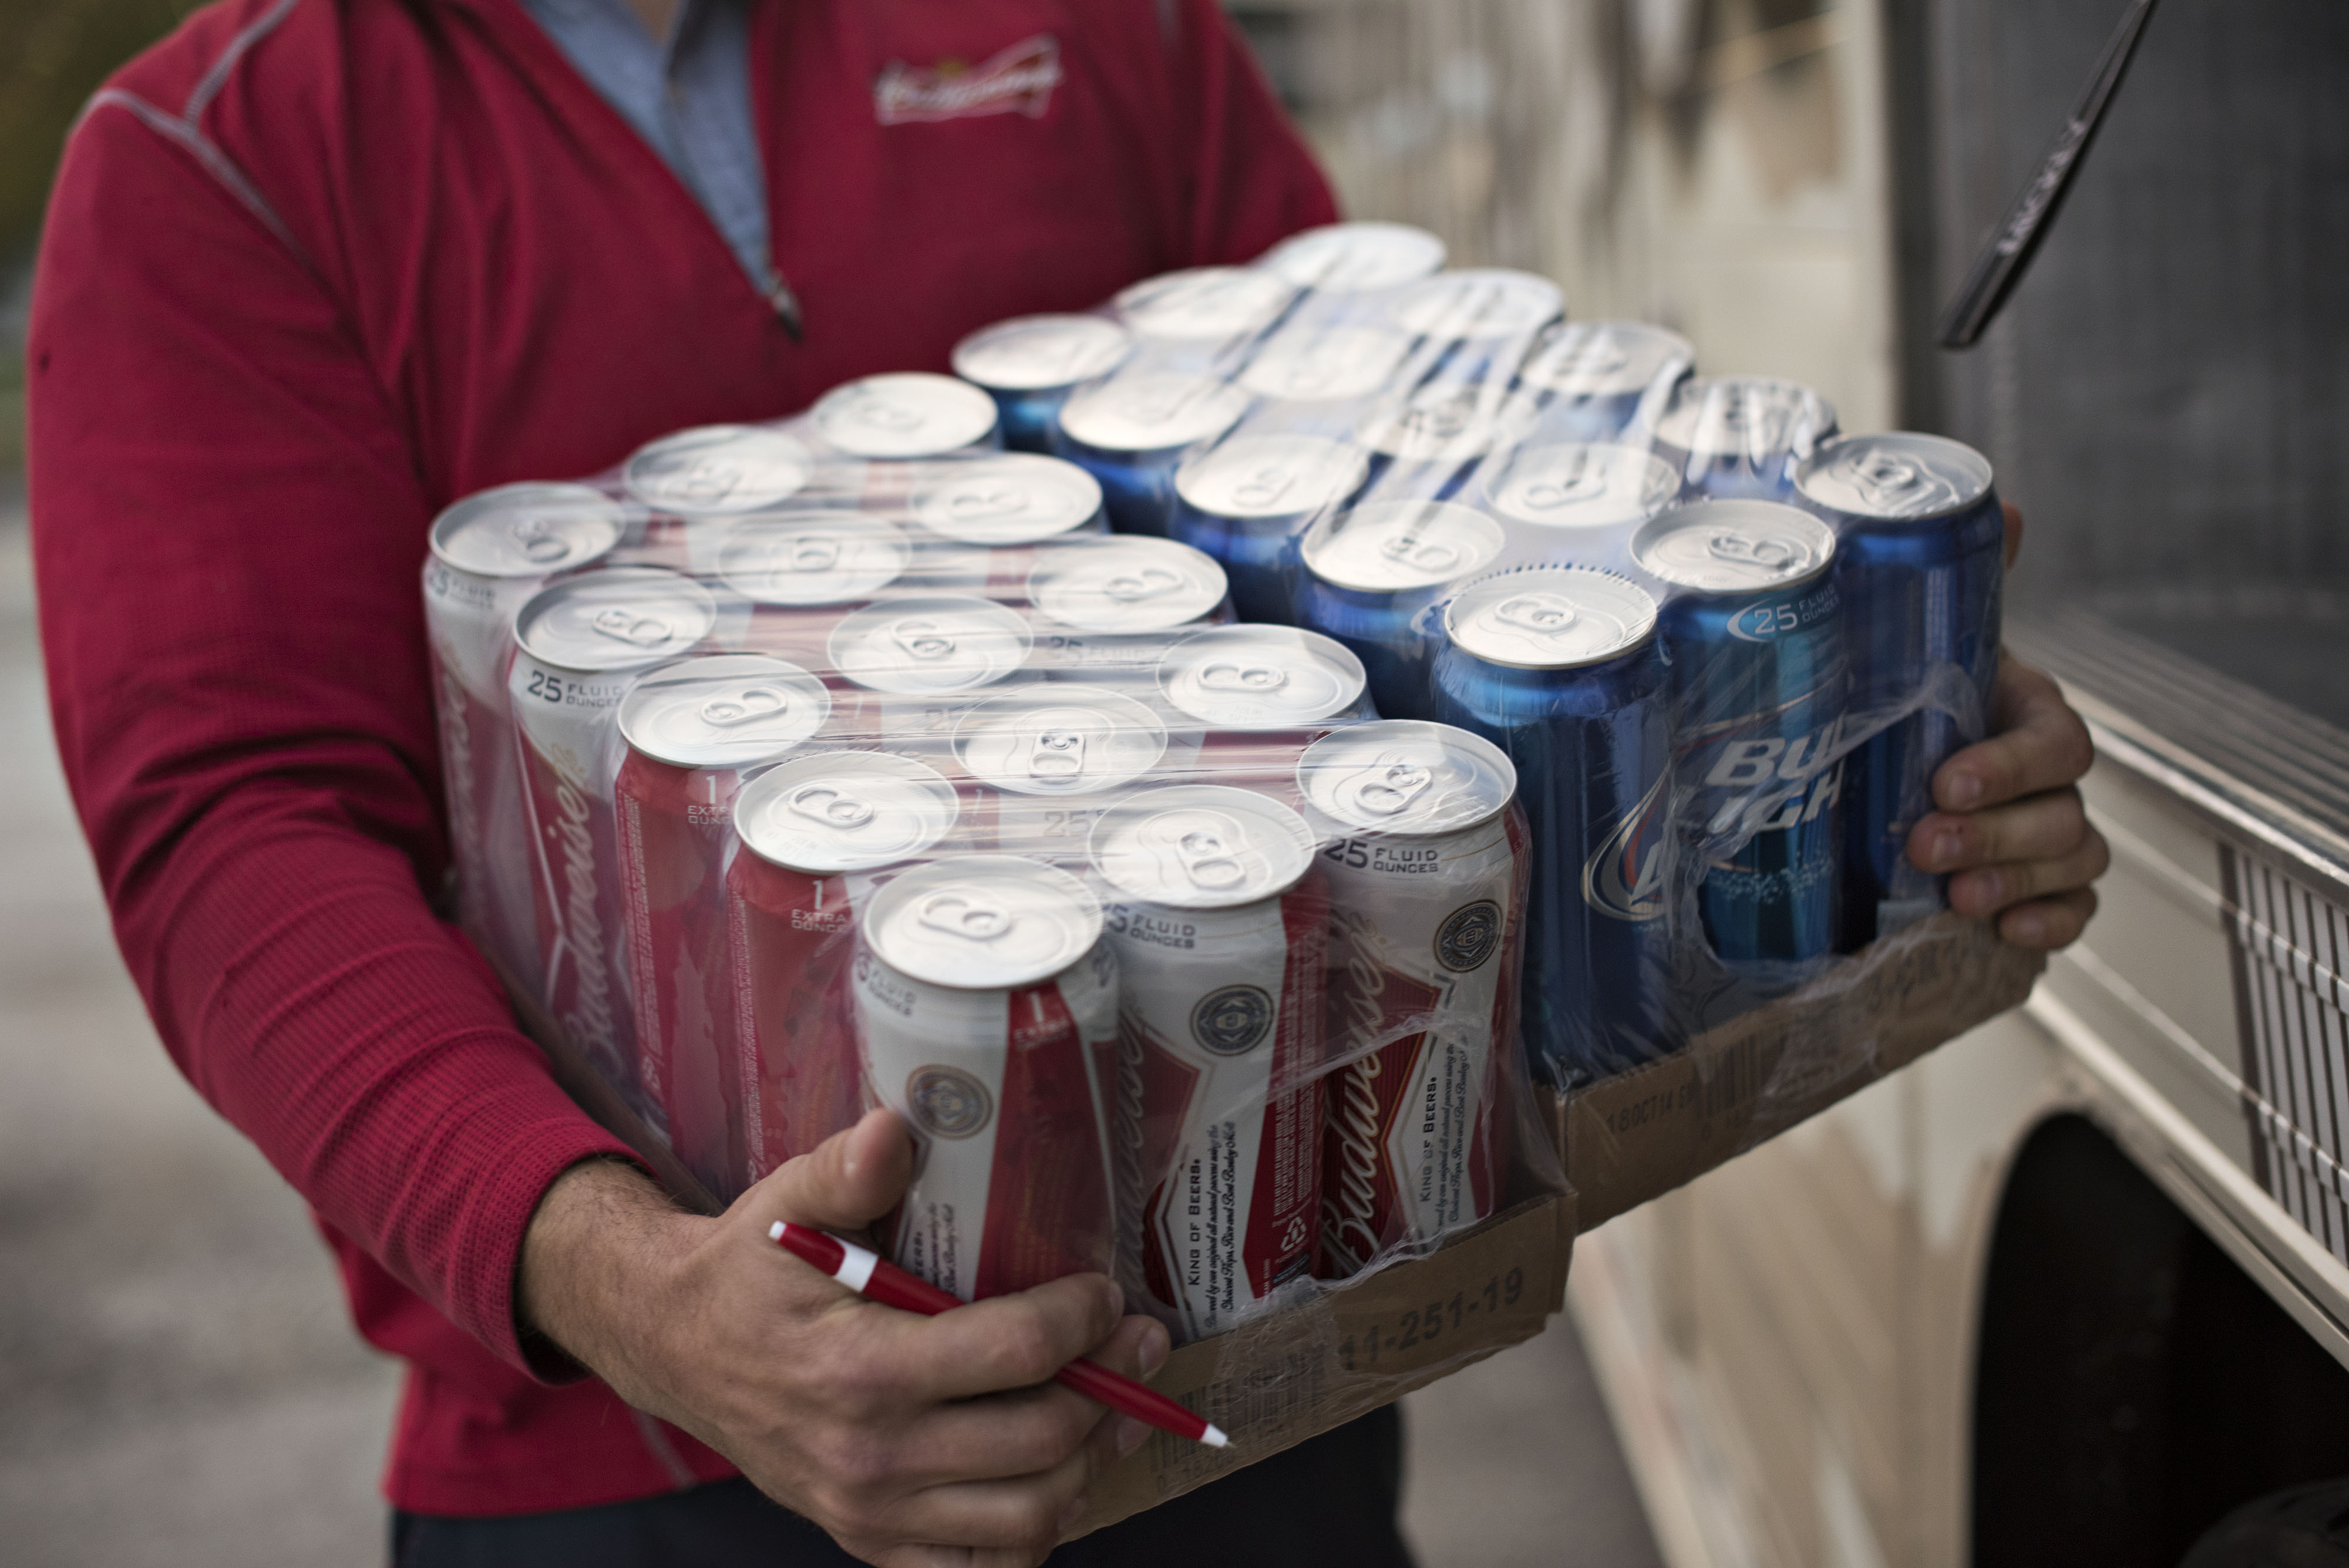 Jeff Allen, a driver for Brewers Distributing Co., delivers Anheuser-Busch beer in Pekin, Illinois, U.S., on Thursday, Oct. 30, 2014. (Bloomberg&mdash;Bloomberg via Getty Images)